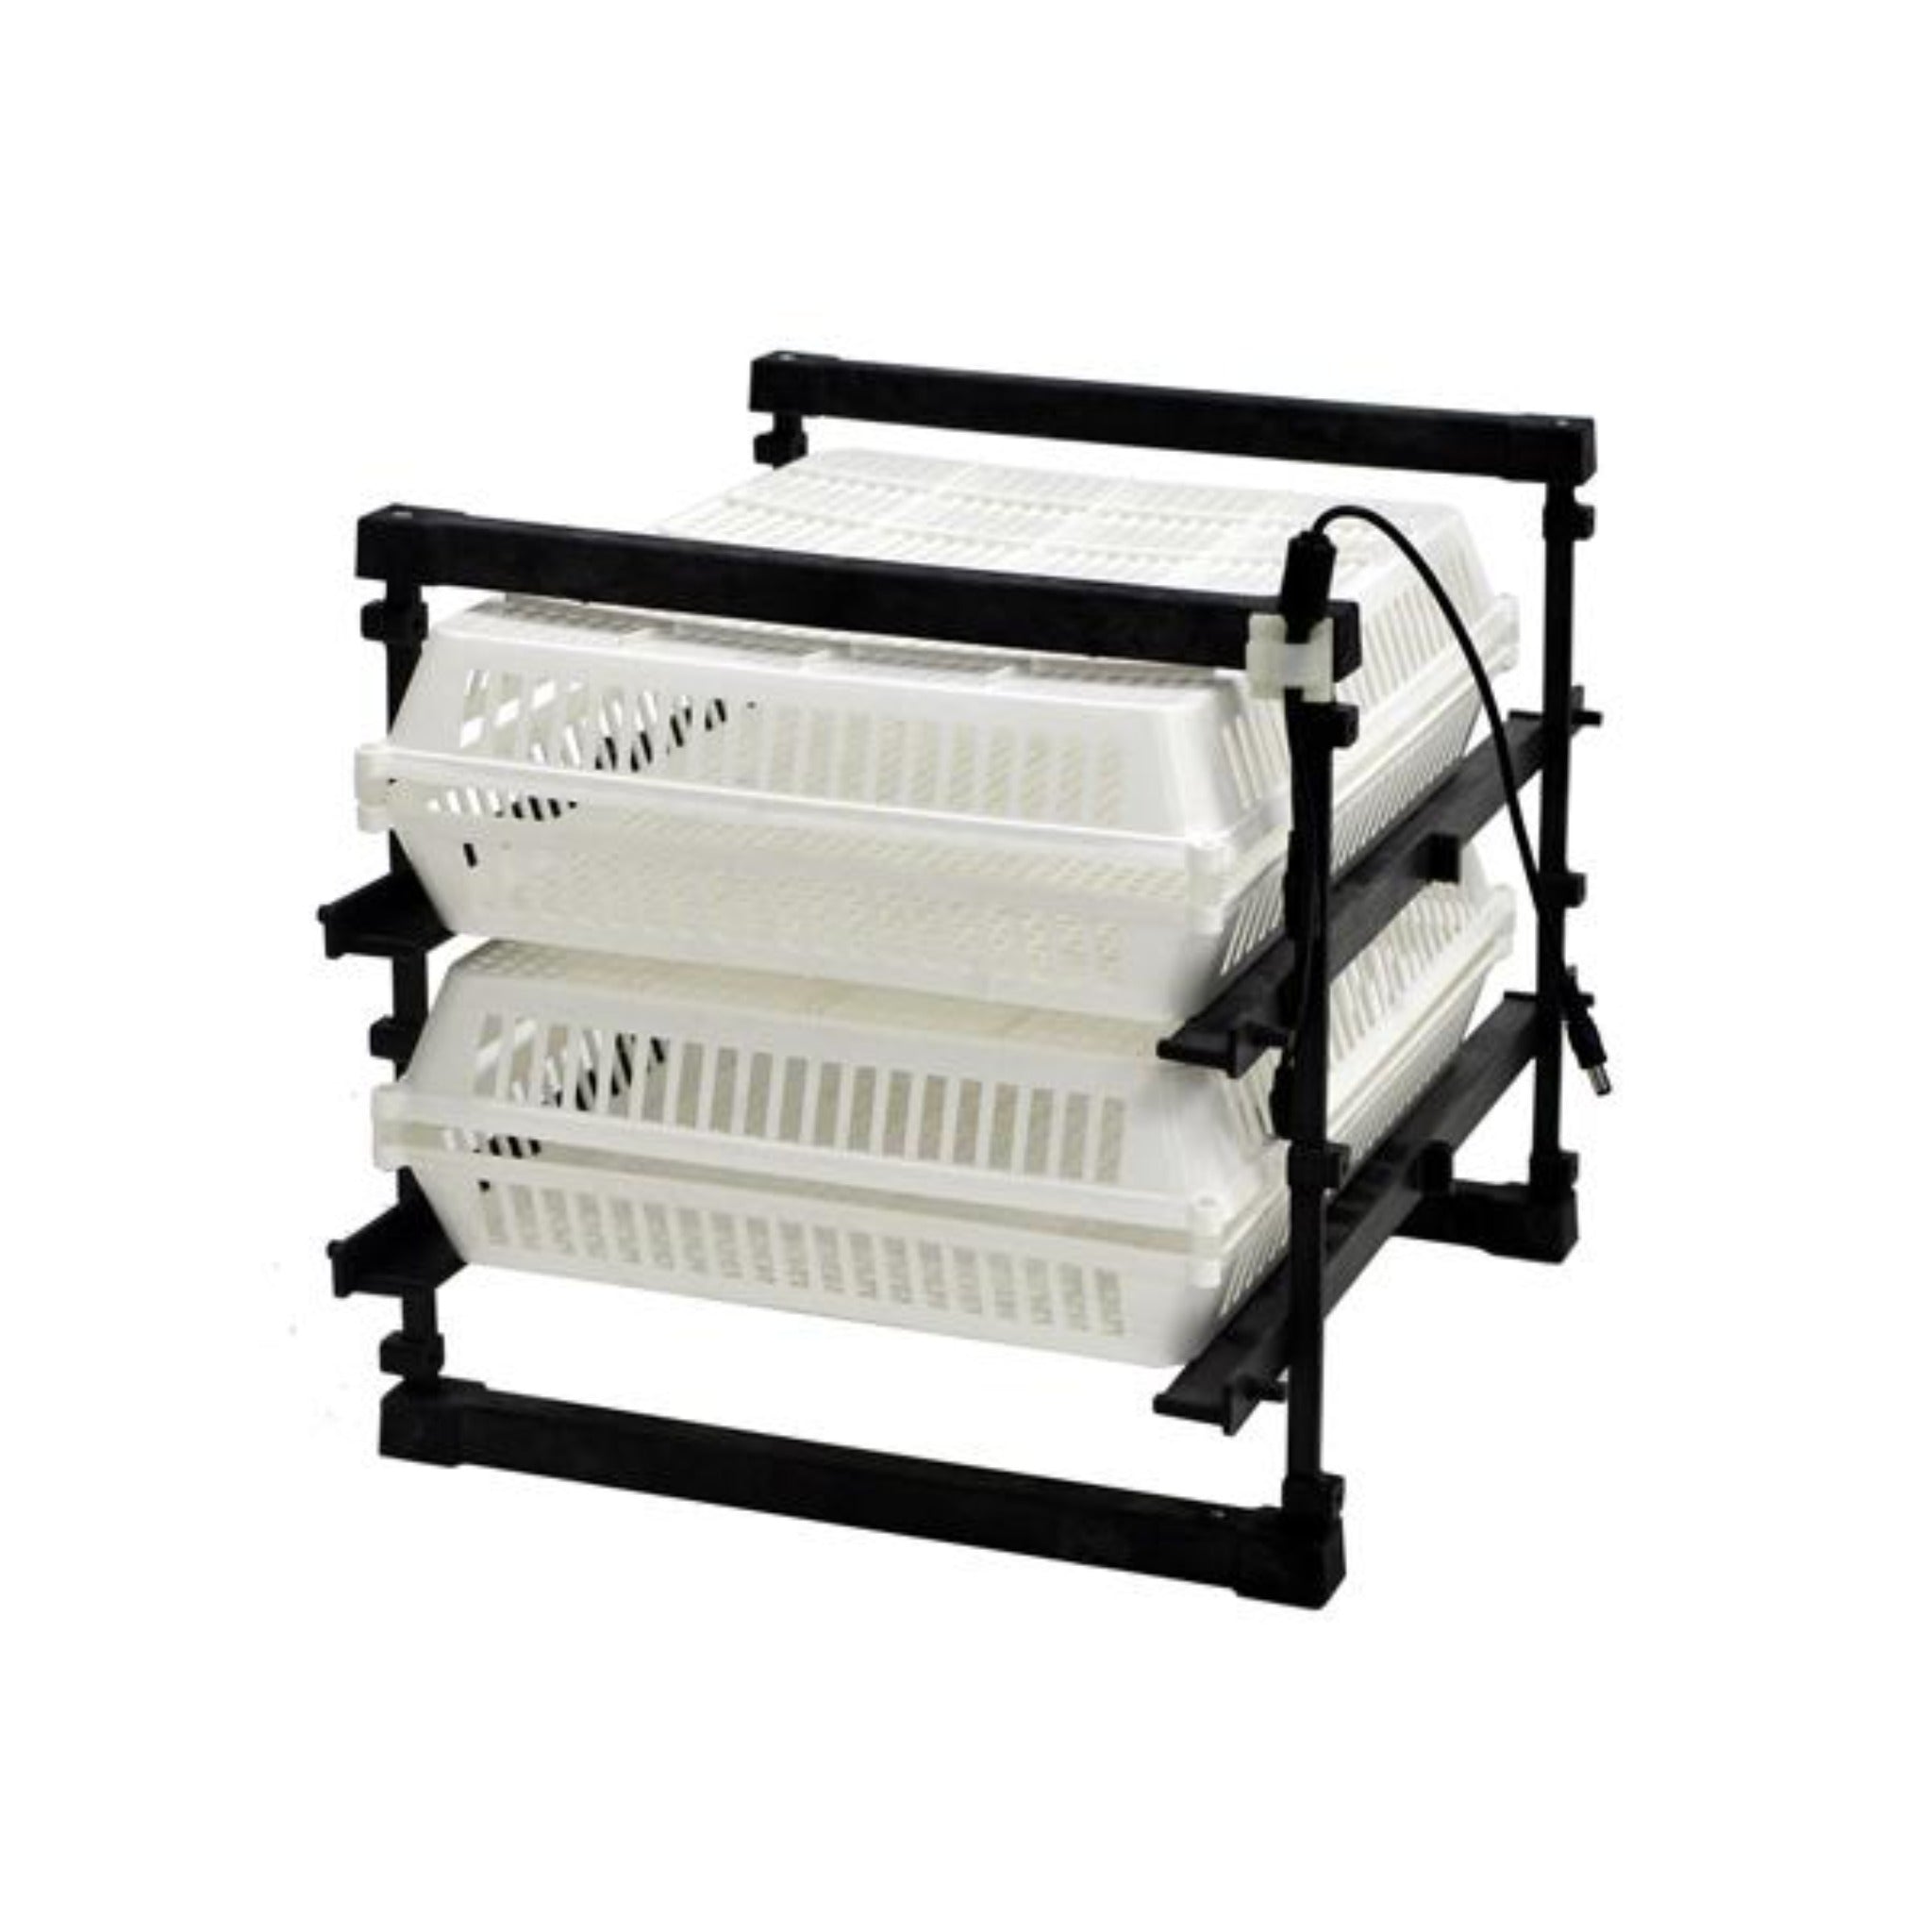 Conturn 60 Set - Automatic Egg Turners and Hatch Baskets